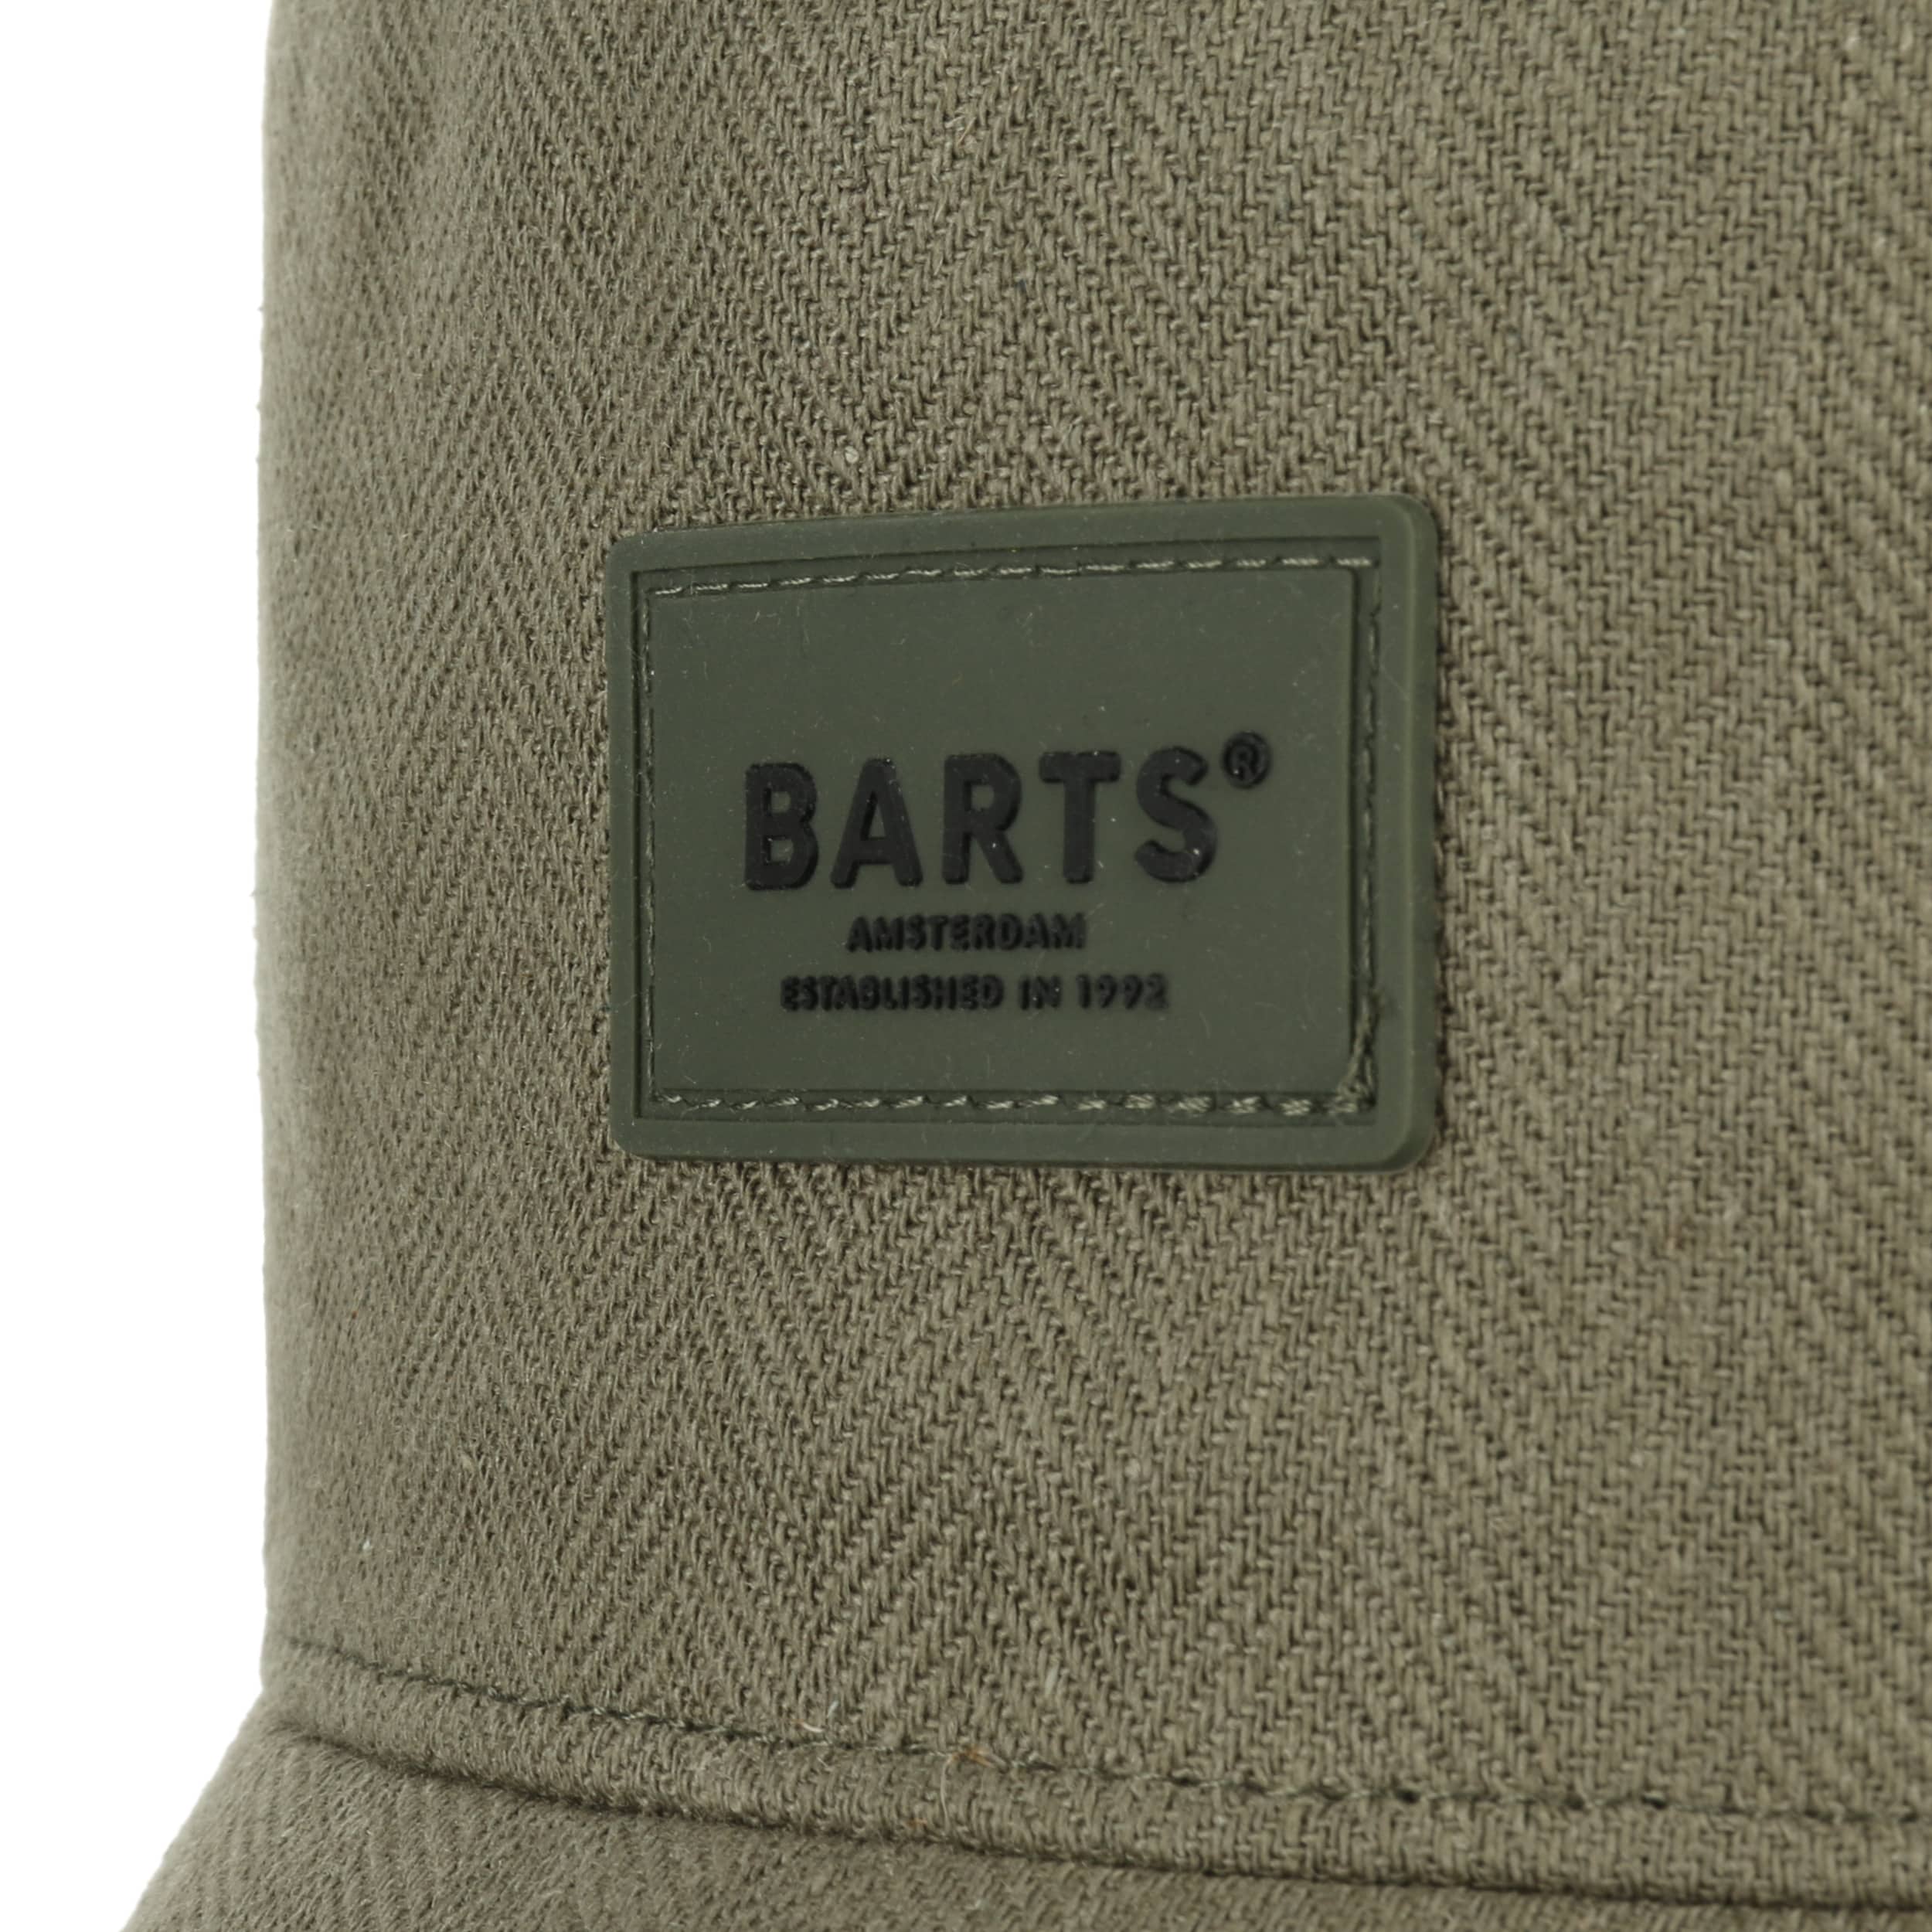 389,00 Army Cap Montania kr by - Barts